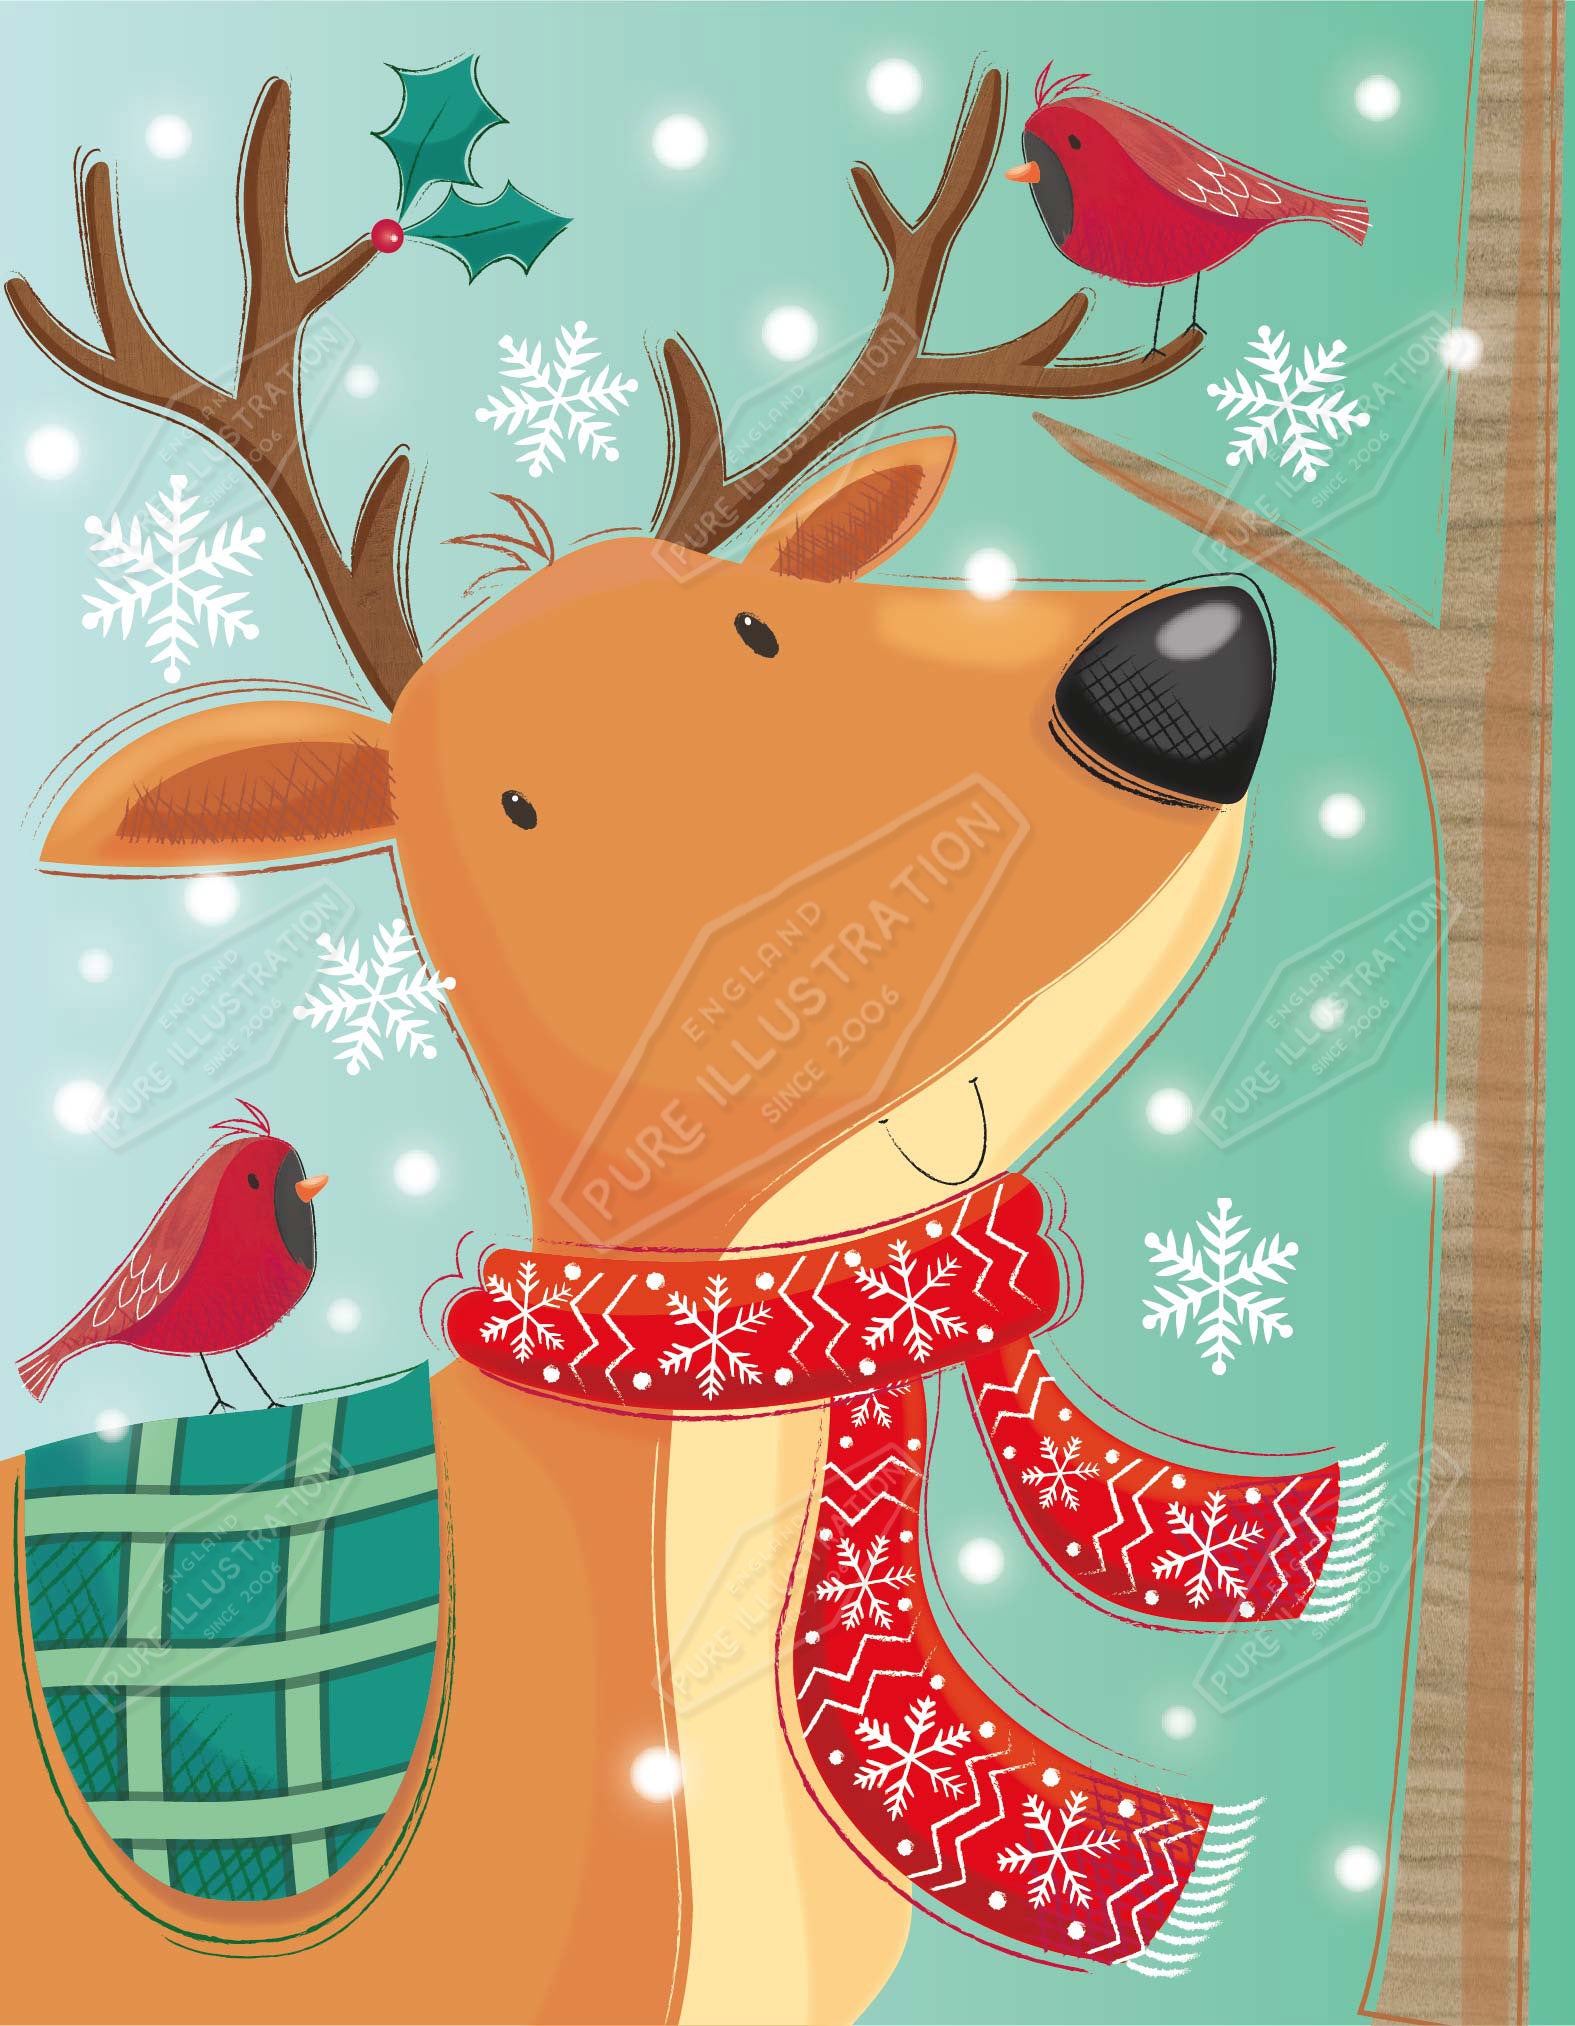 00035246SPI- Sarah Pitt is represented by Pure Art Licensing Agency - Christmas Greeting Card Design